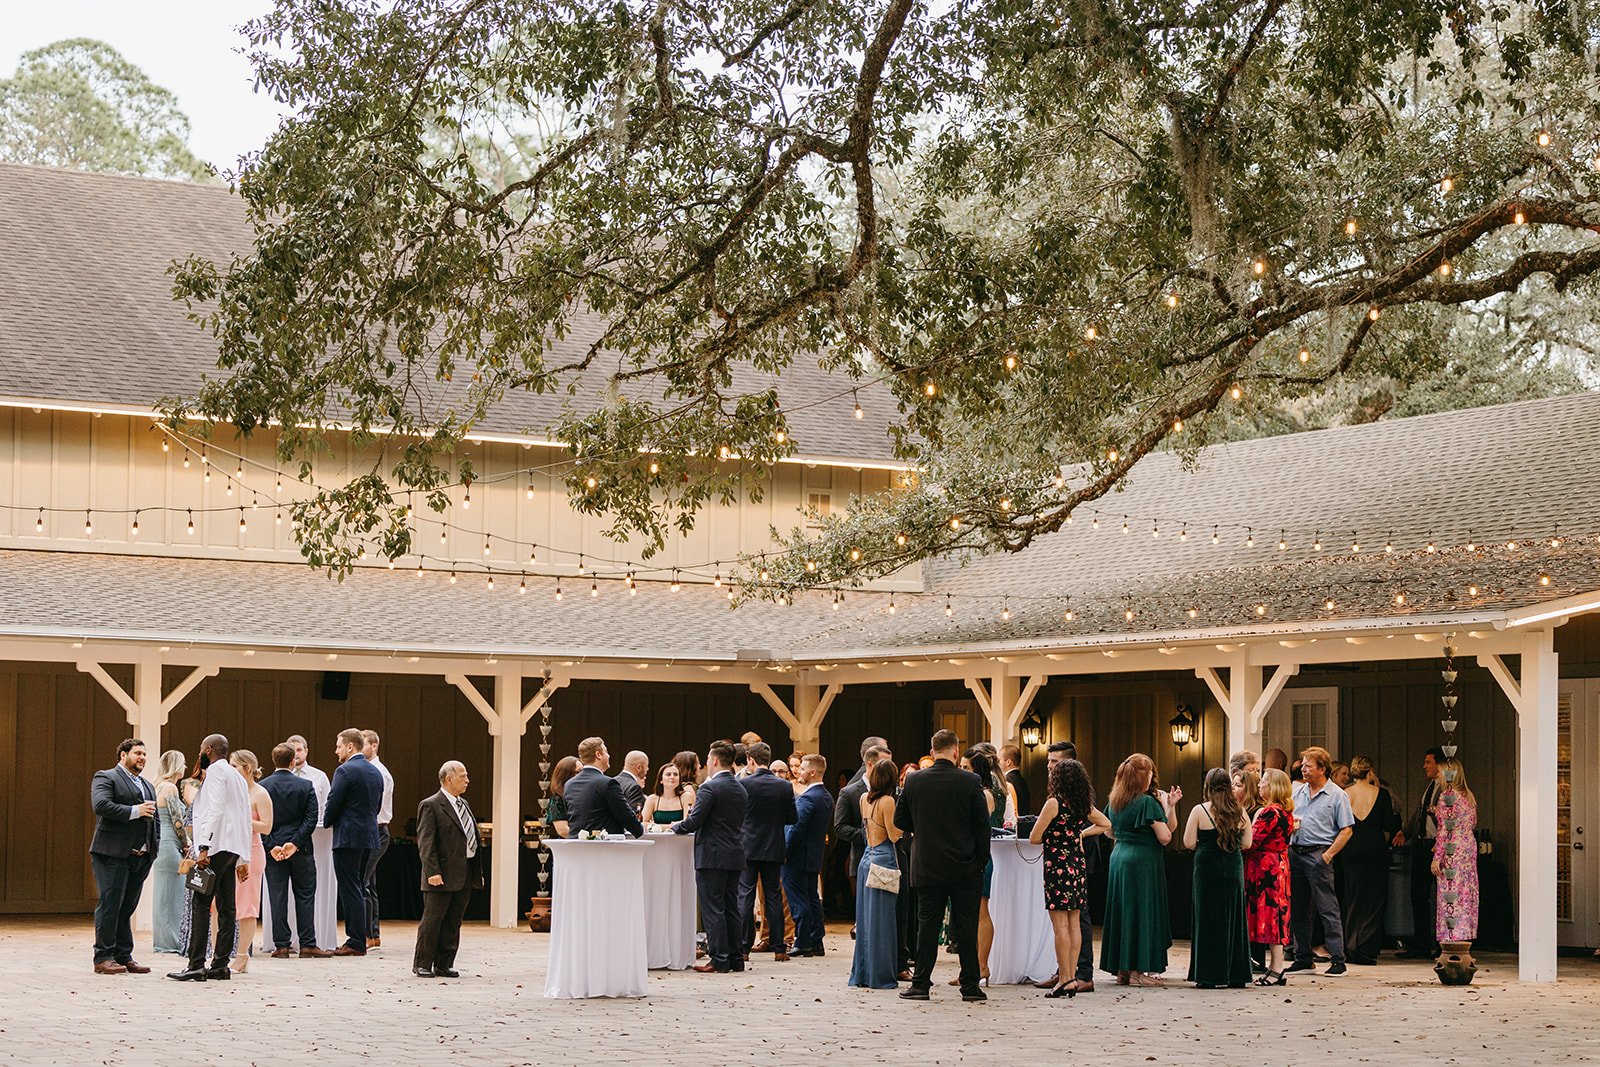 Any time of year, cocktail hour is lovely on our patio! 

@meagangainesphotography
@white_tie_events
@southerncharmevents
@4riverssmokehouse

#weddingday #southernwedding #bowingoaks #jacksonvillewedding #jacksonvilleweddingvenue #weddingreception #o